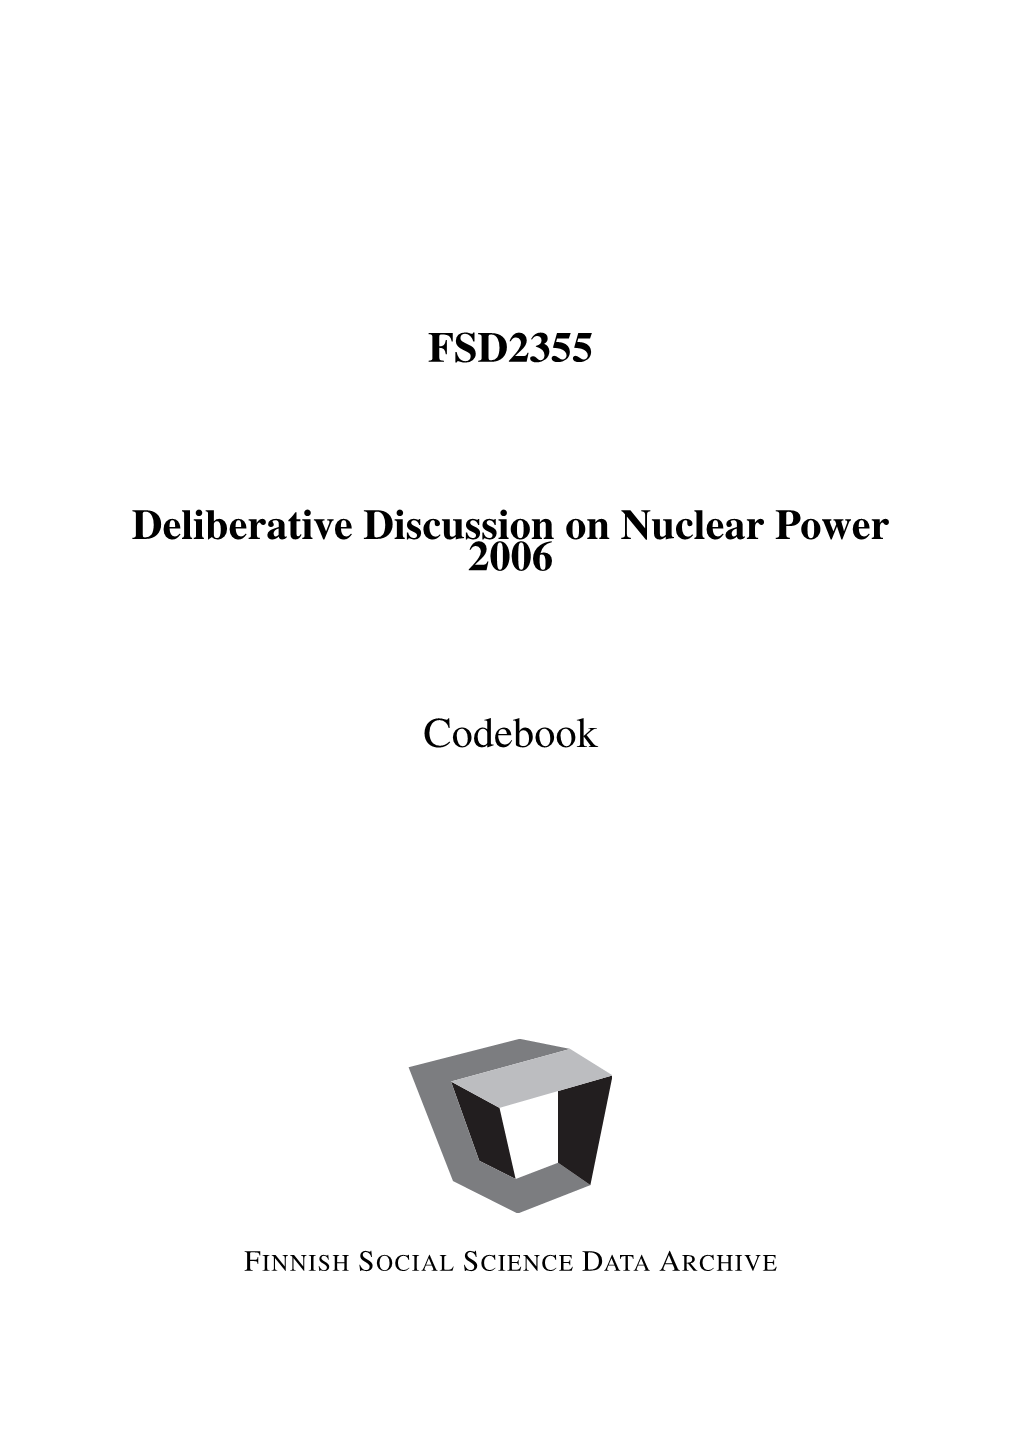 FSD2355 Deliberative Discussion on Nuclear Power 2006 Codebook